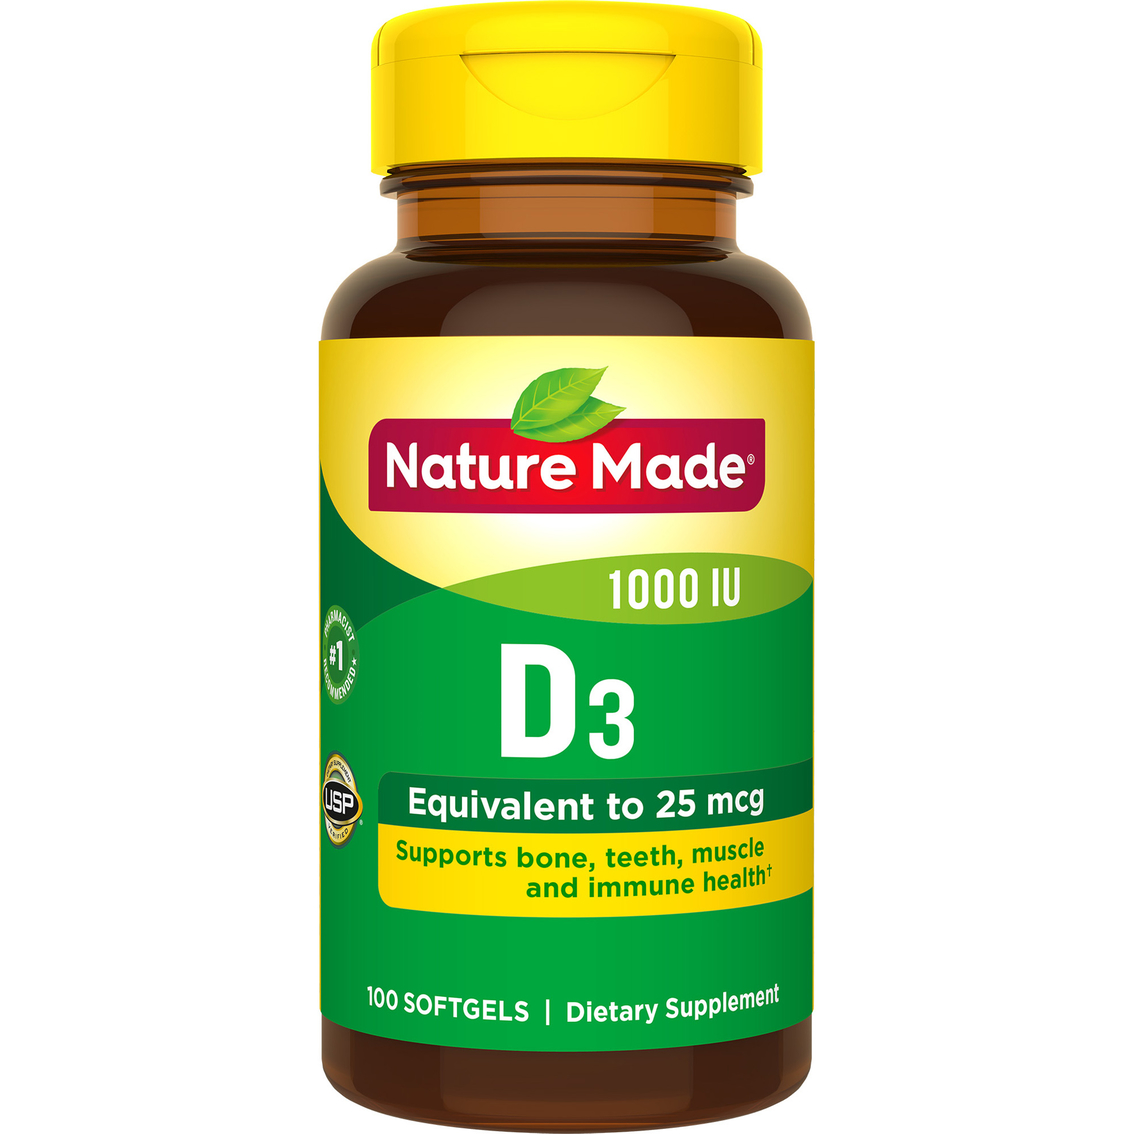 Parana rivier Klooster Absoluut Nature Made Vitamin D3 25 Mcg (1000 Iu) Softgels 100 Ct. | Vitamins &  Supplements | Beauty & Health | Shop The Exchange